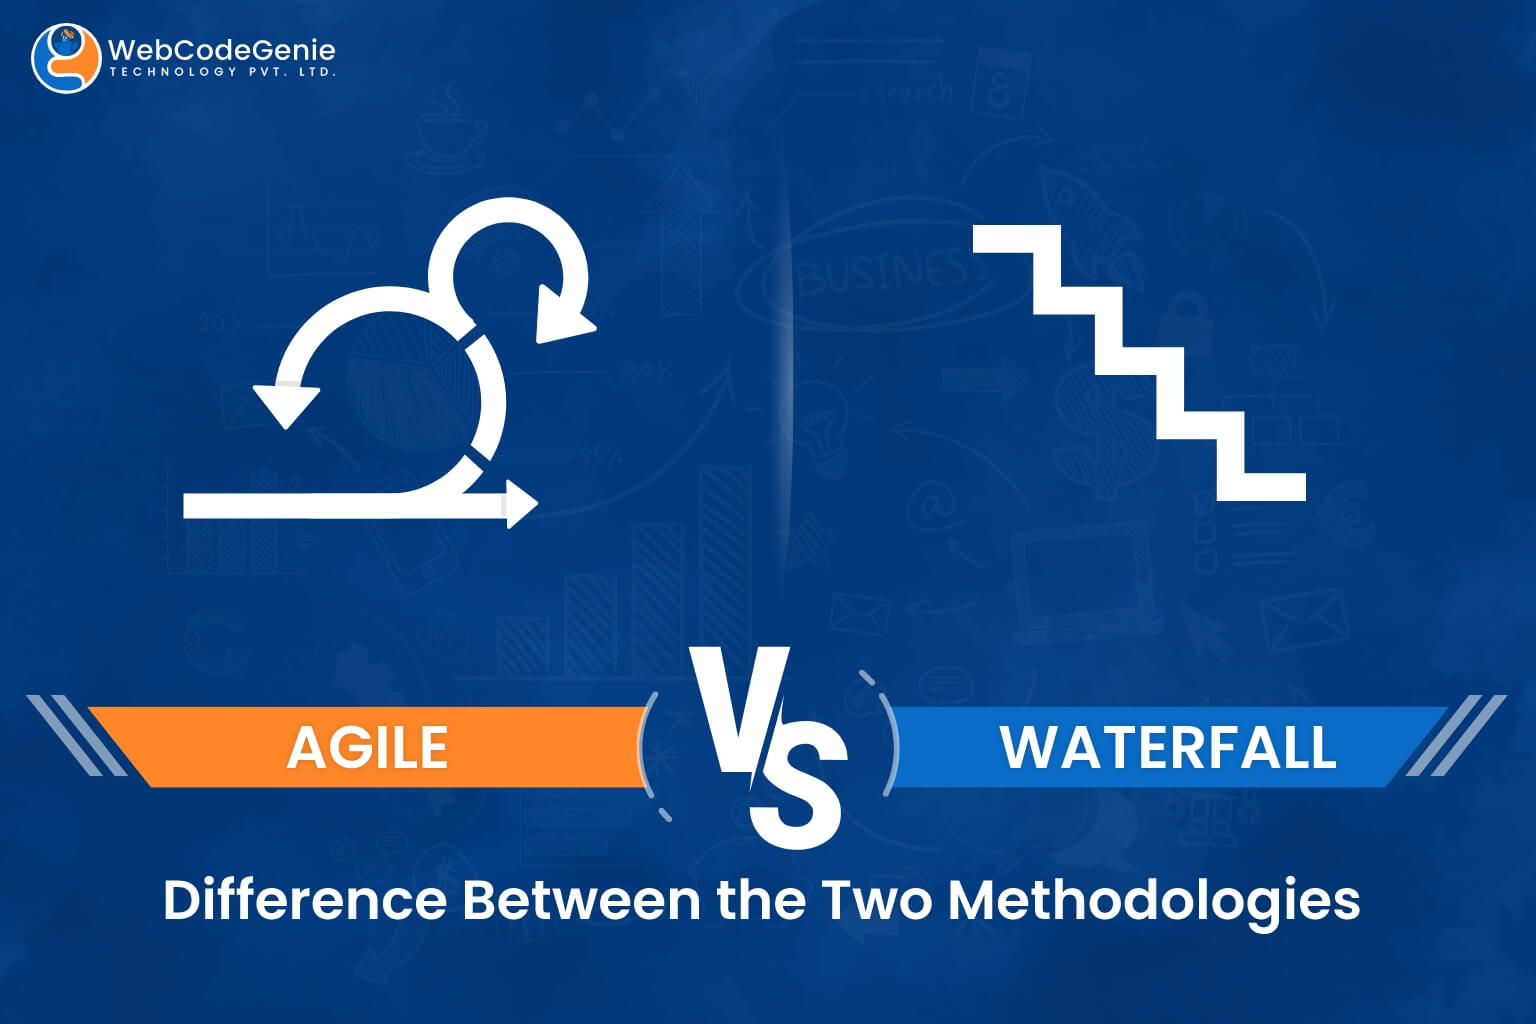 Agile vs. Waterfall Difference Between the Two Methodologies